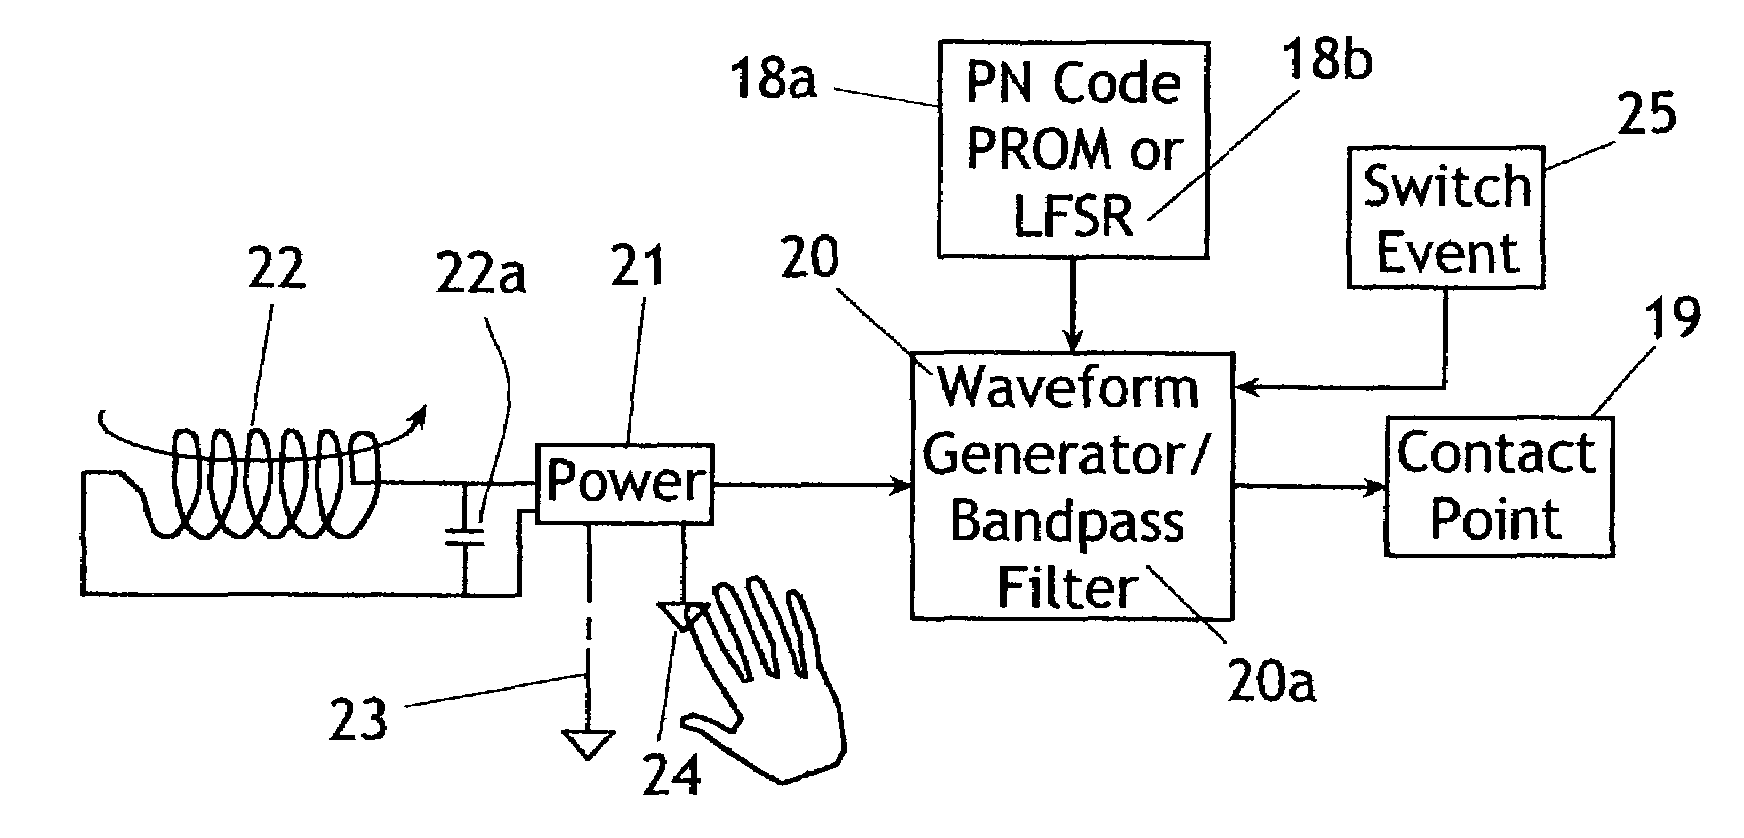 Method and apparatus for a touch sensitive system employing direct sequence spread spectrum (DSSS) technology